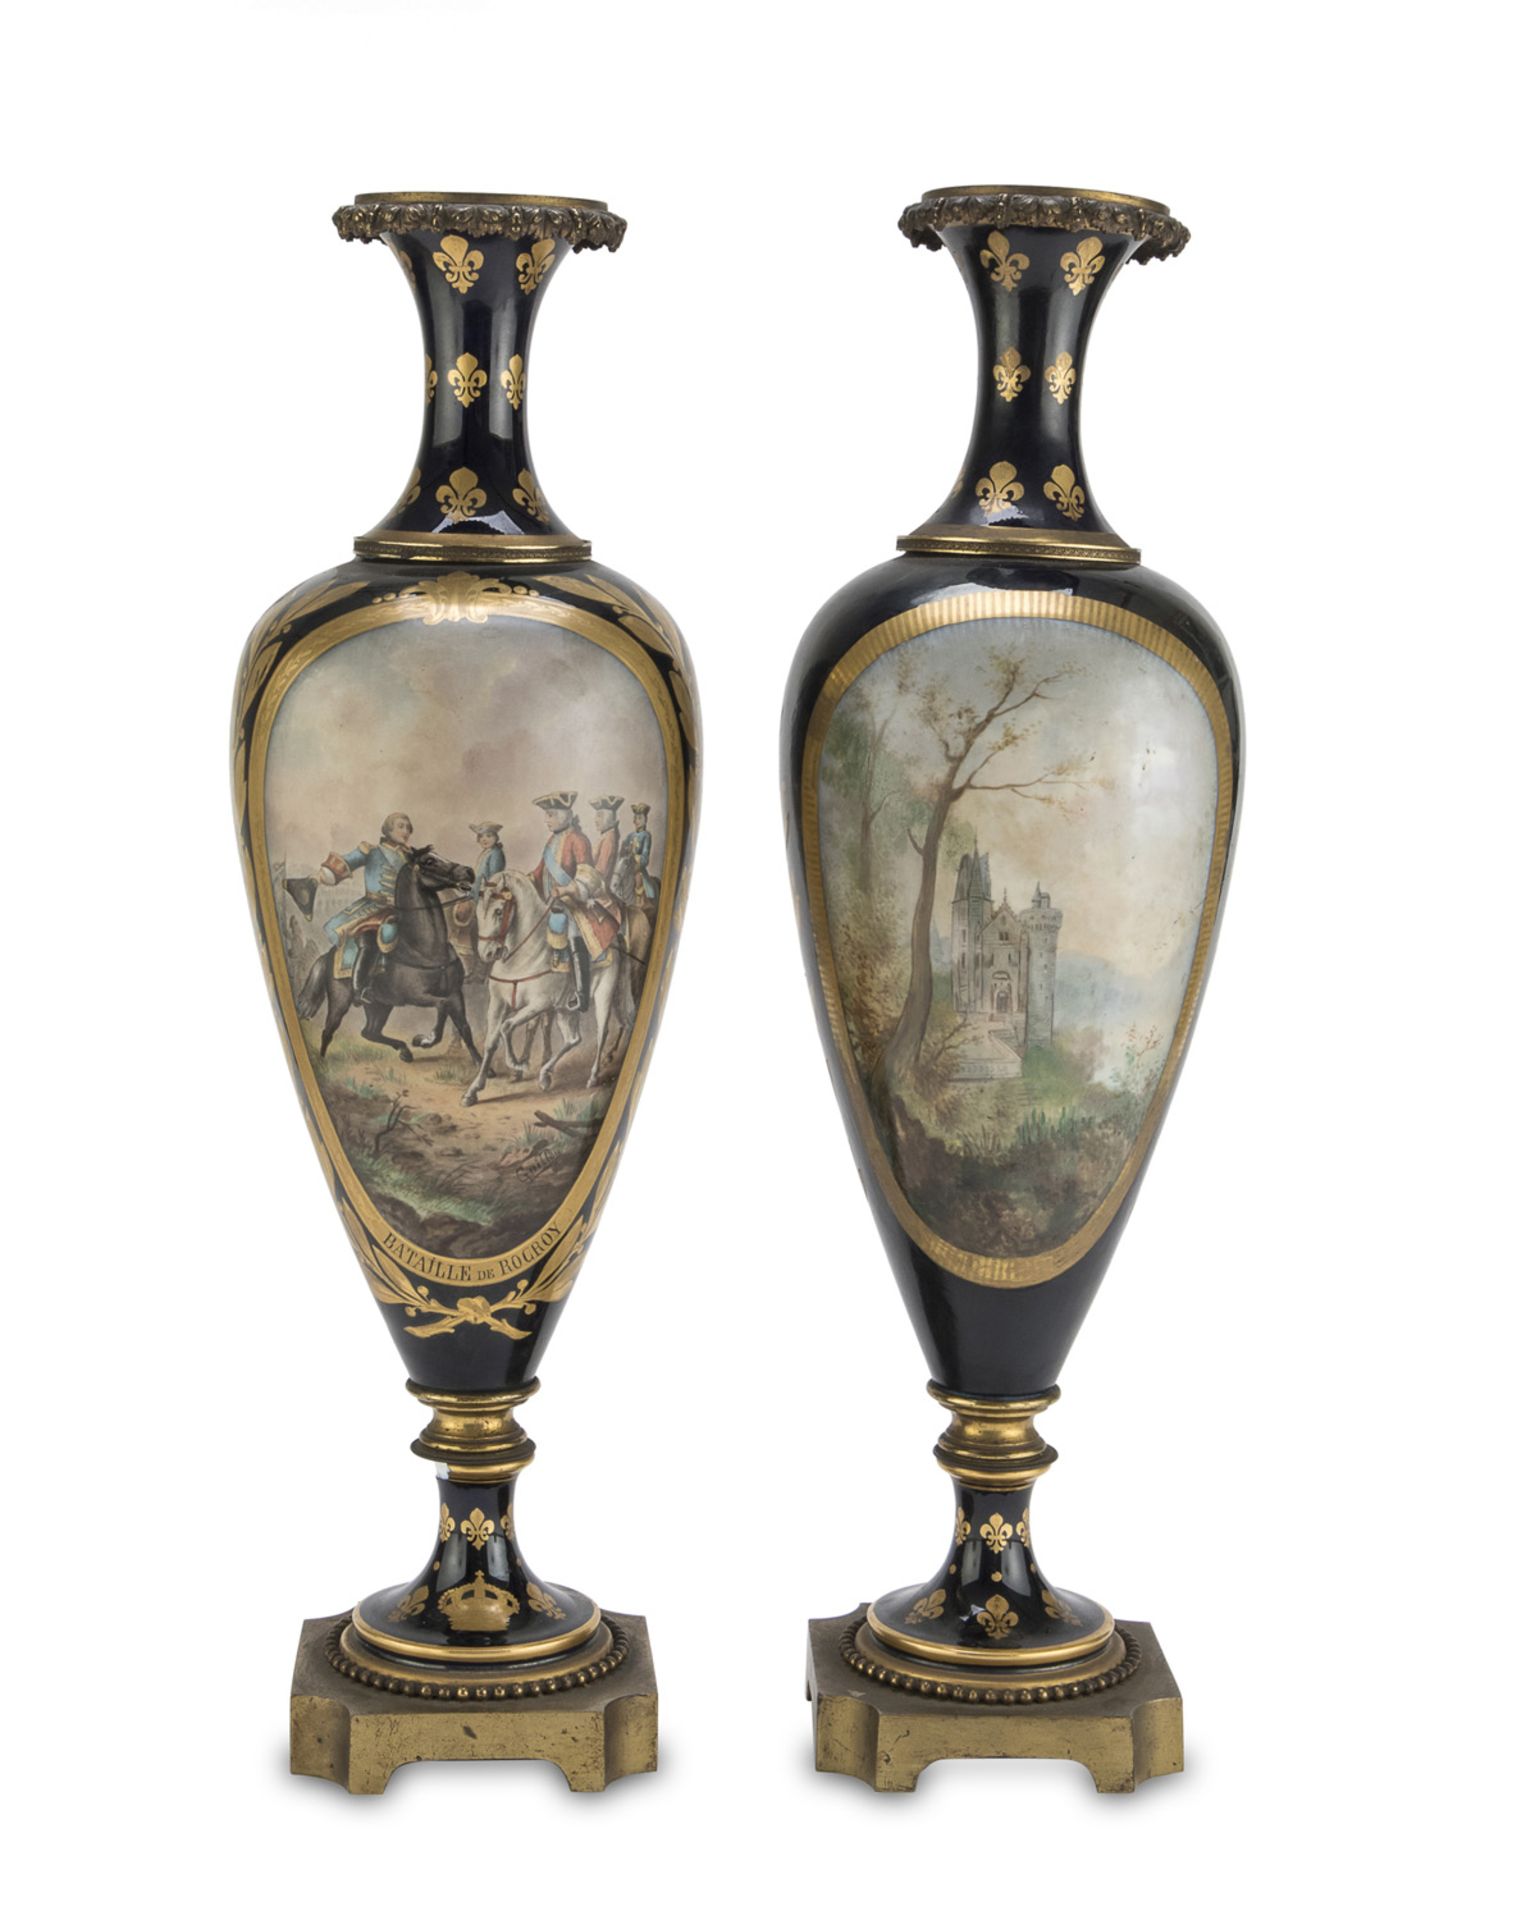 PAIR OF SEVRES PORCELAIN VASES LATE 19TH CENTURY